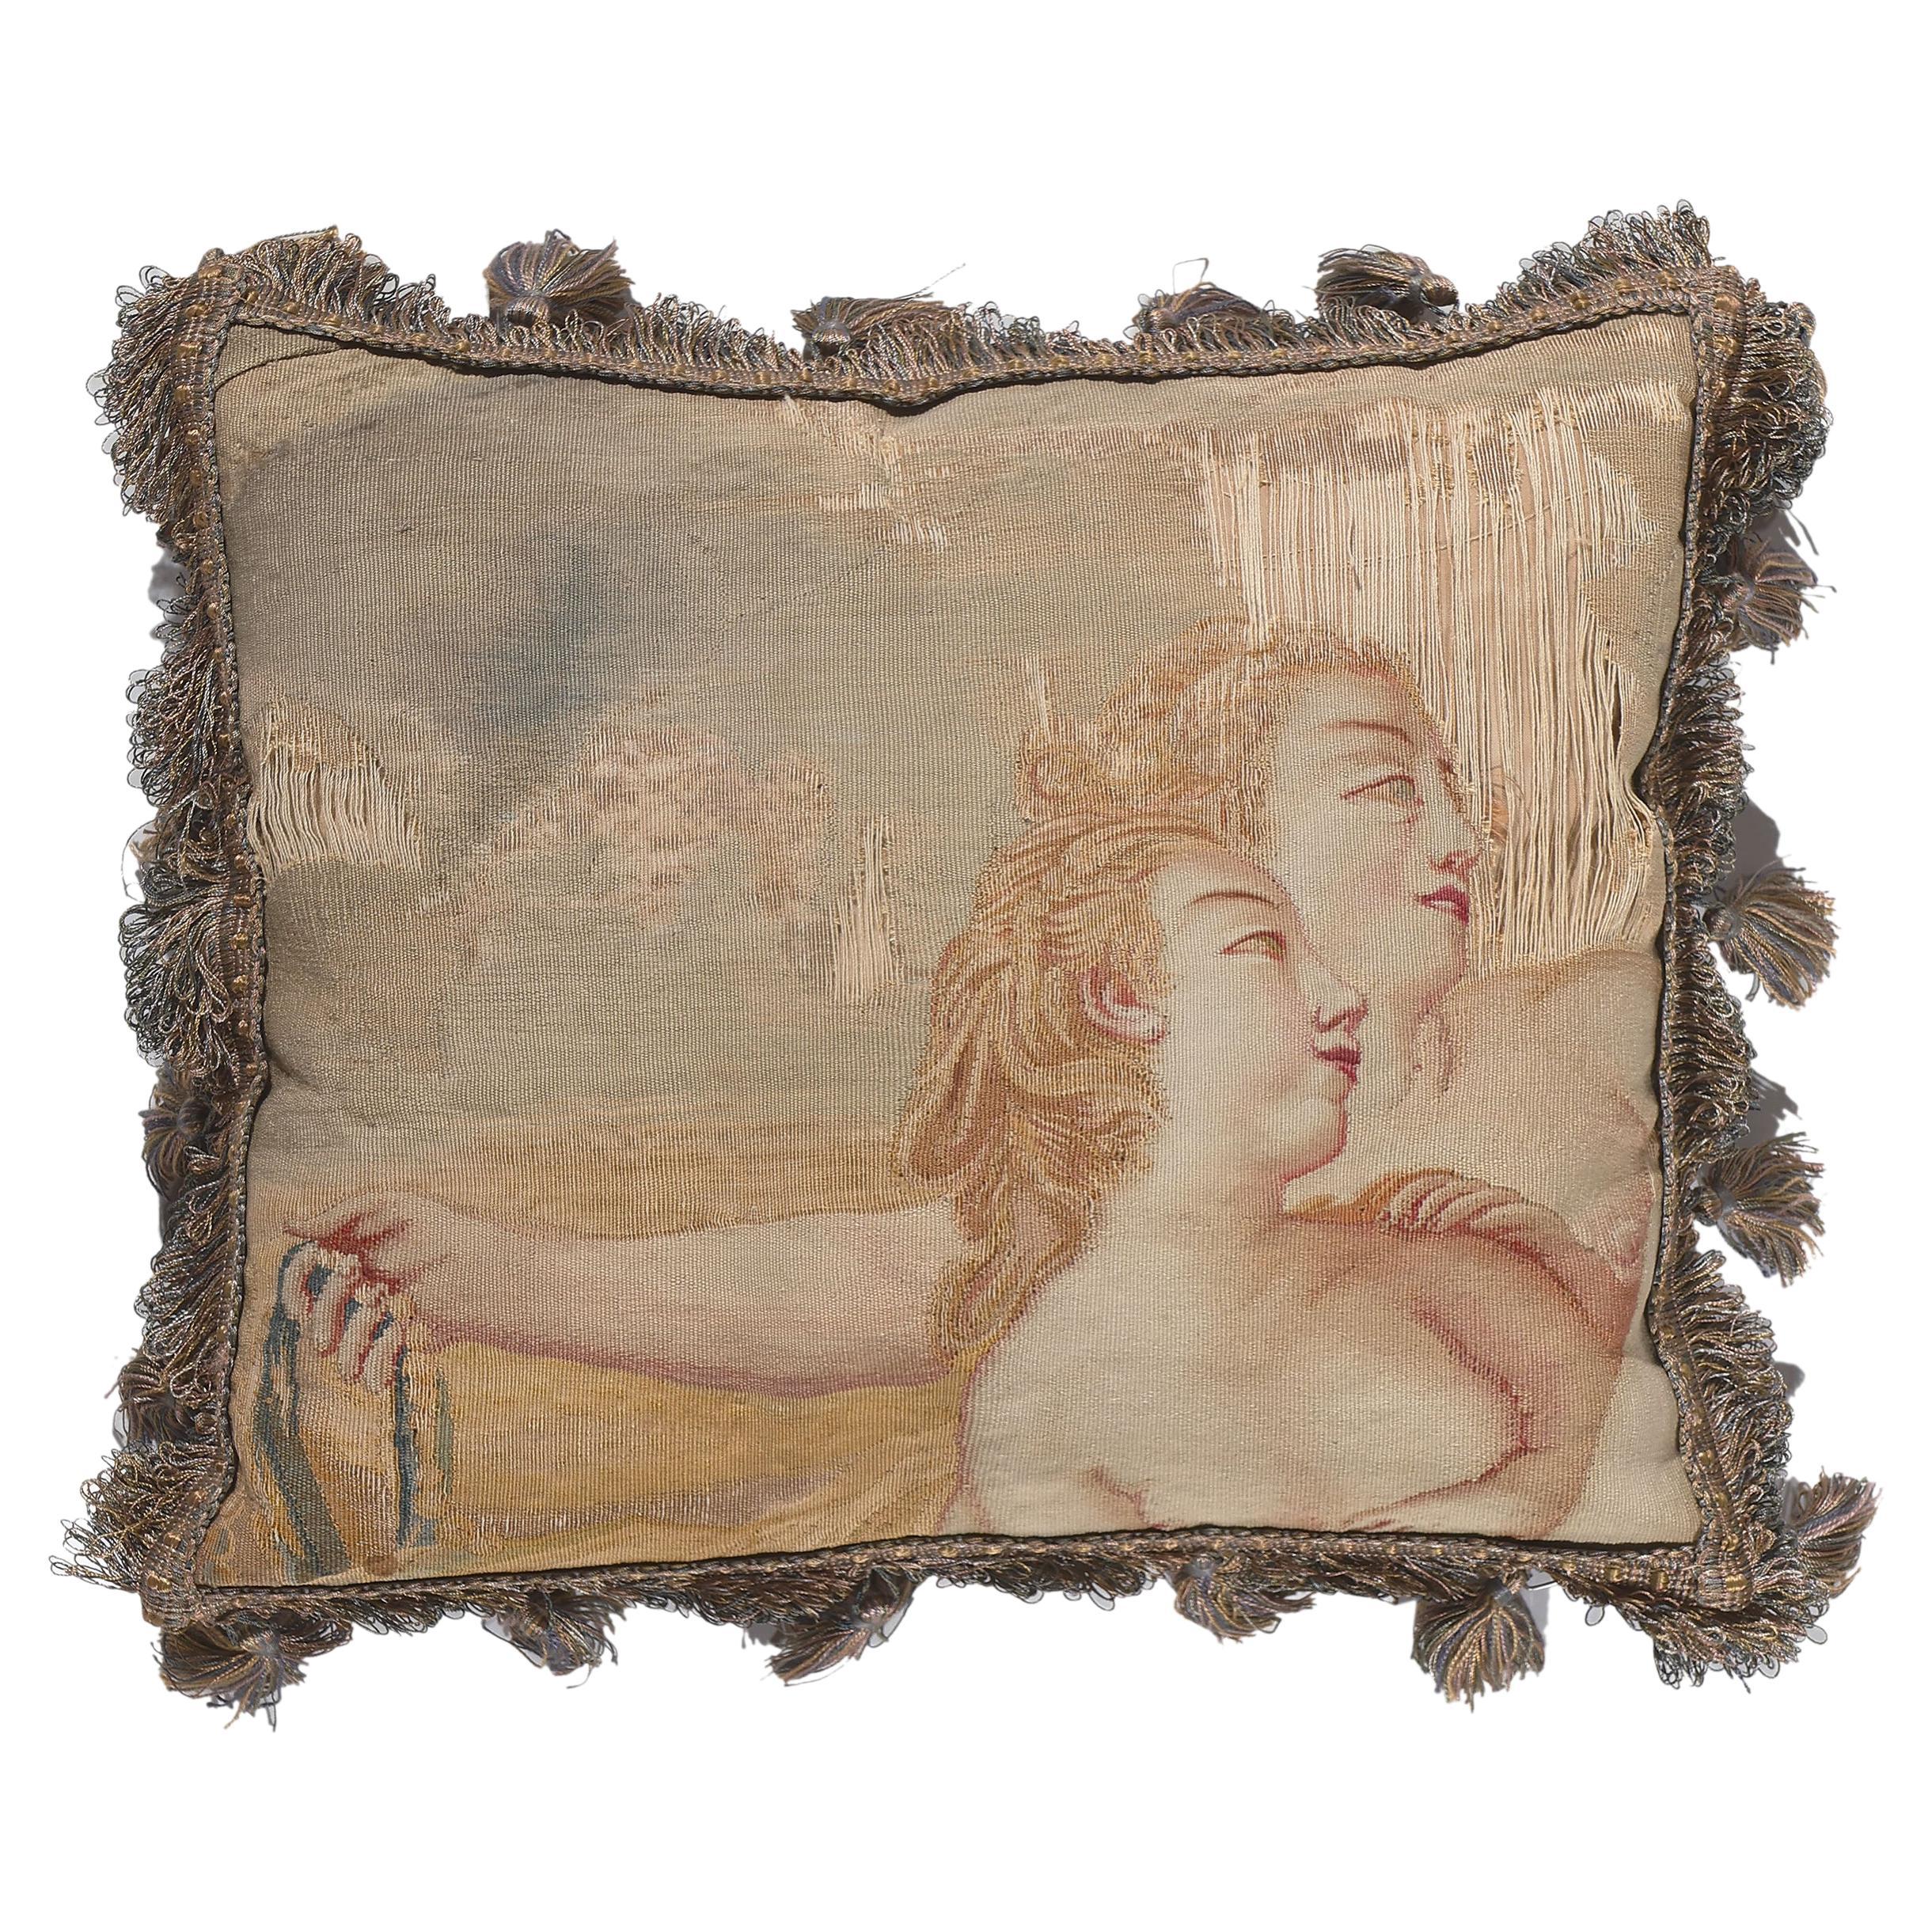 Antique French Aubusson Pillow with Venus and Adonis